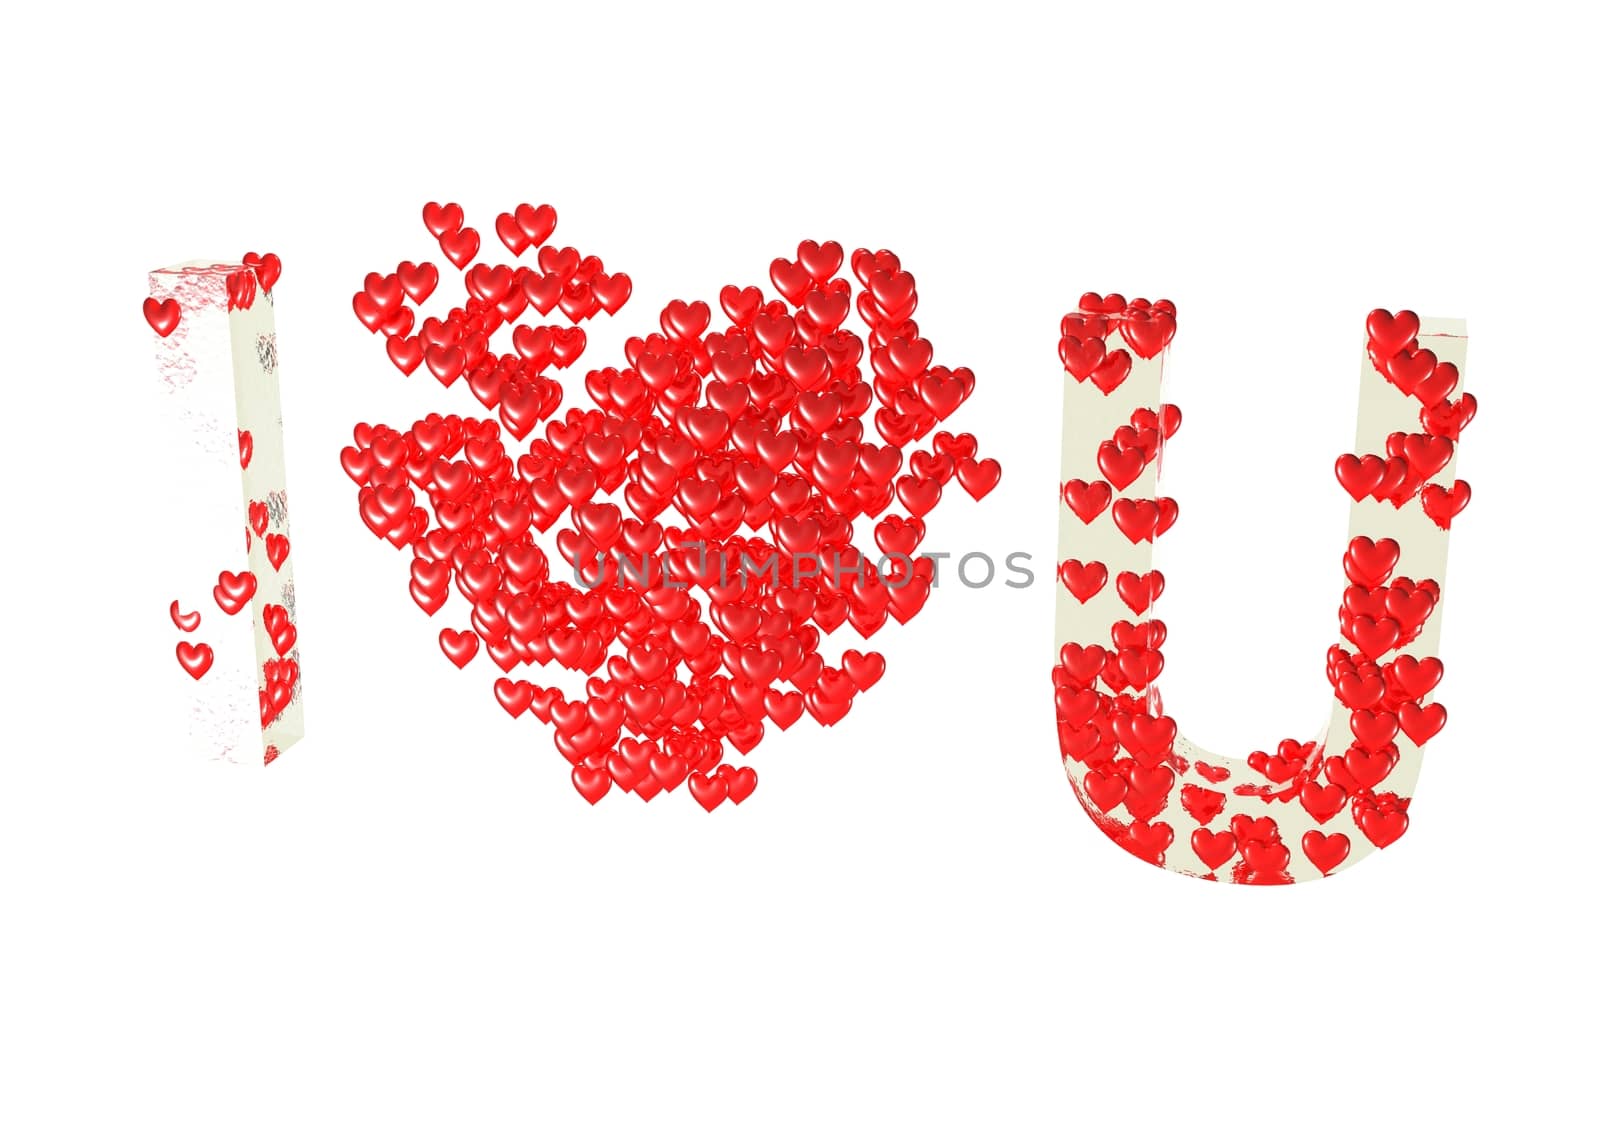 Inscription I love you made of red small hearts